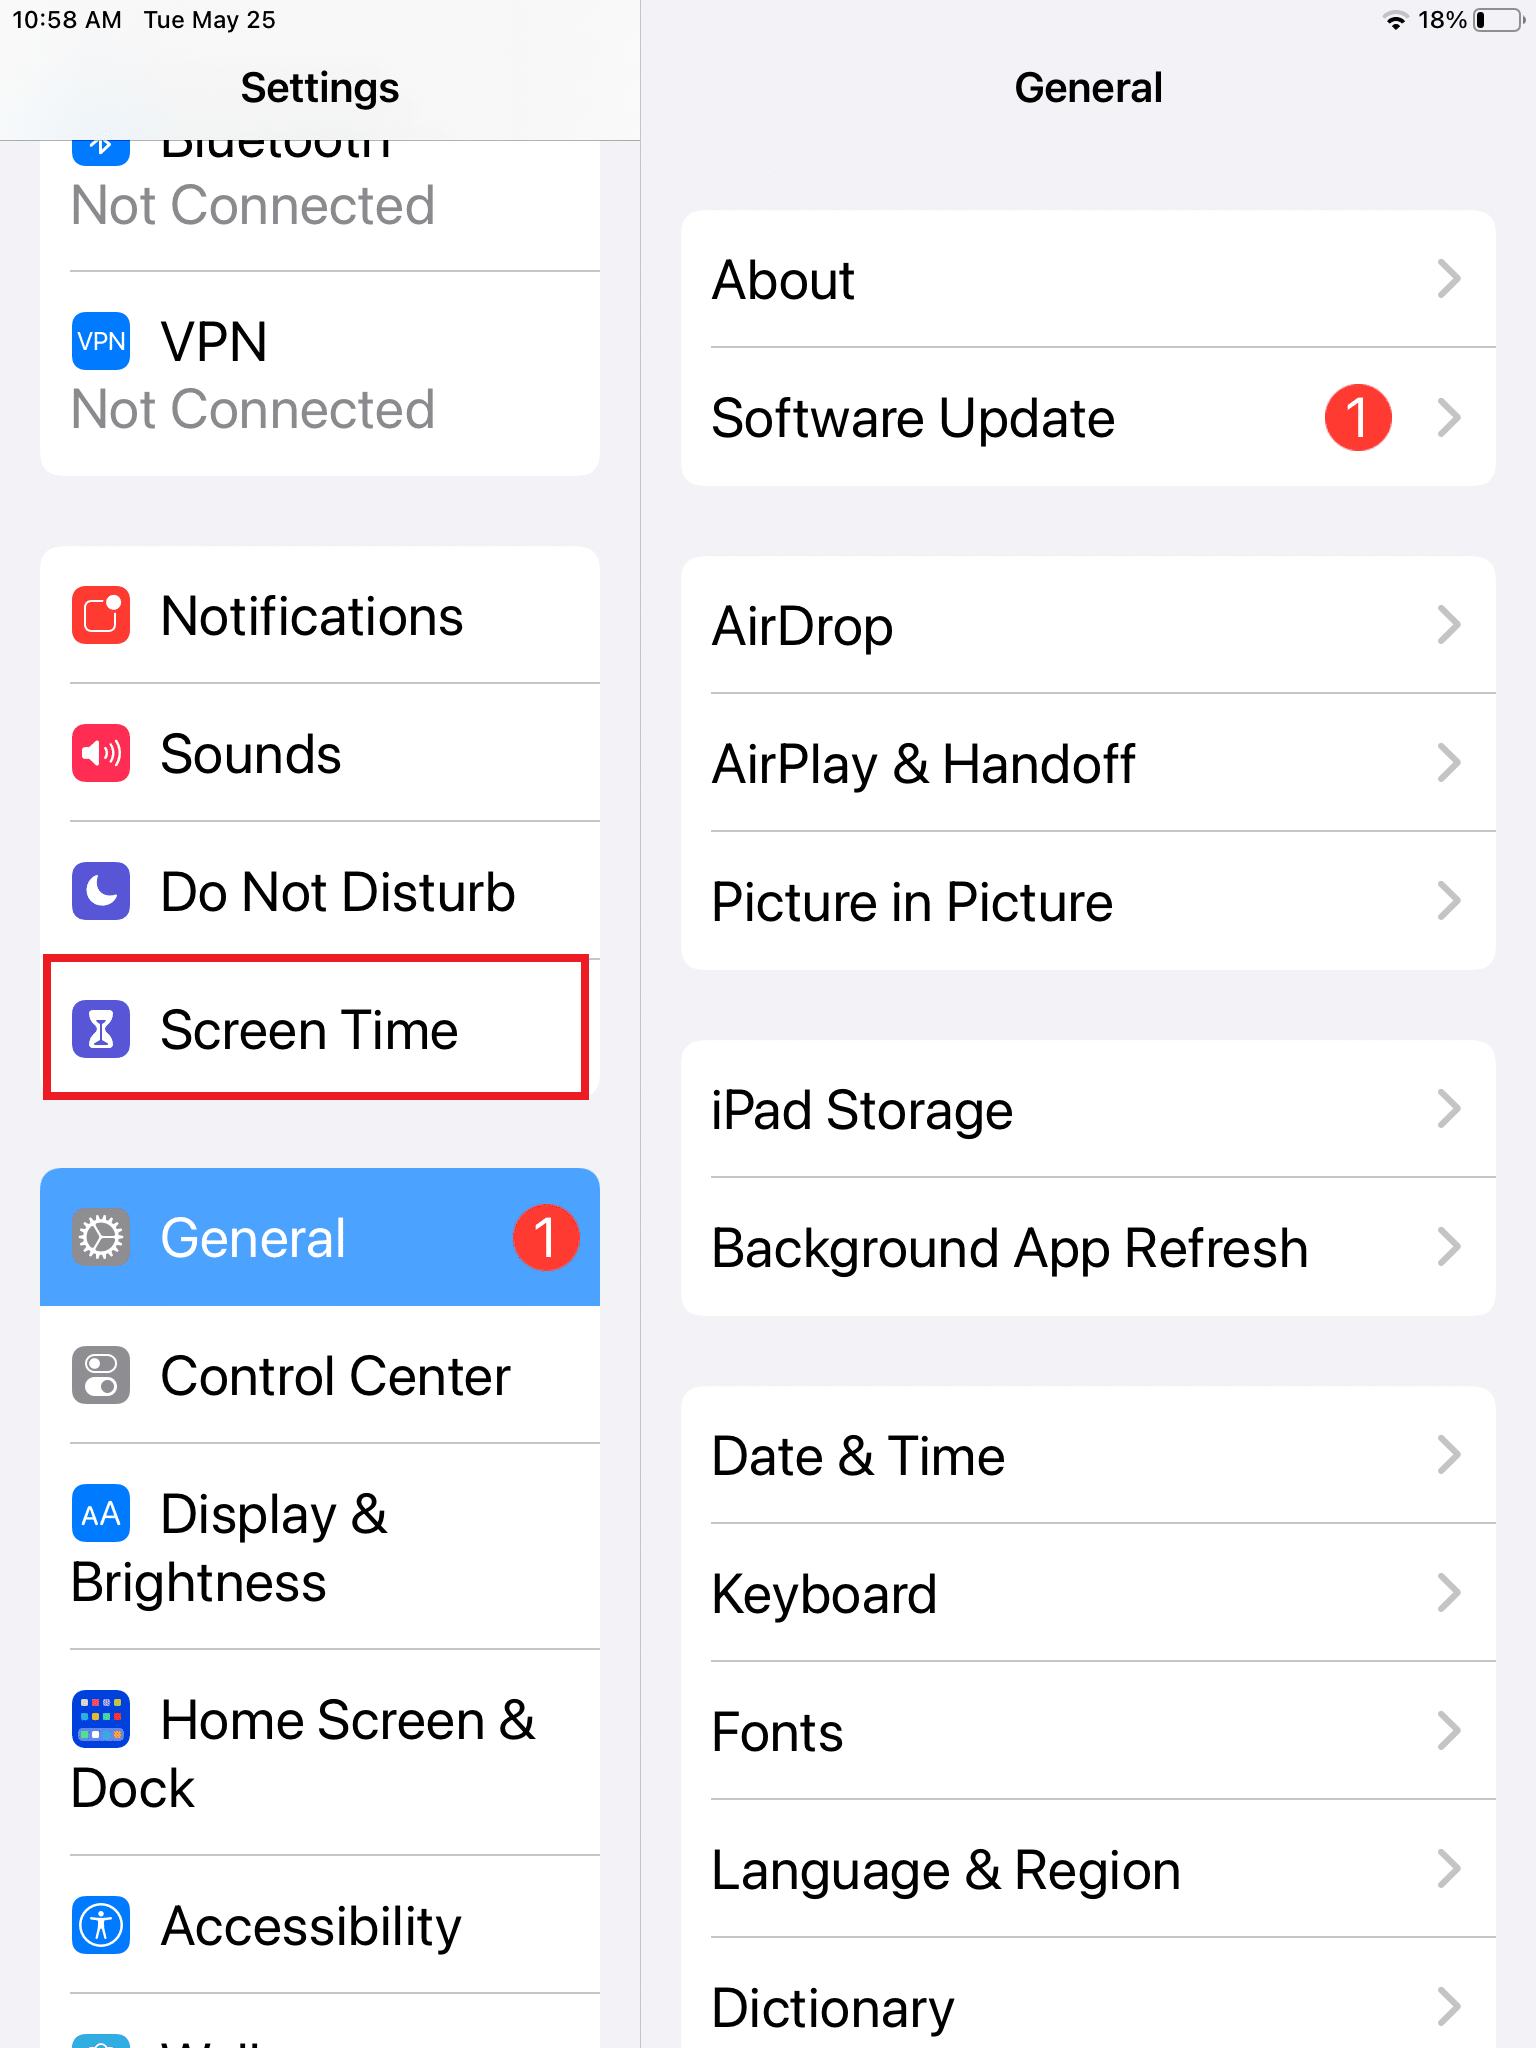 In the settings app, tap on Screen Time